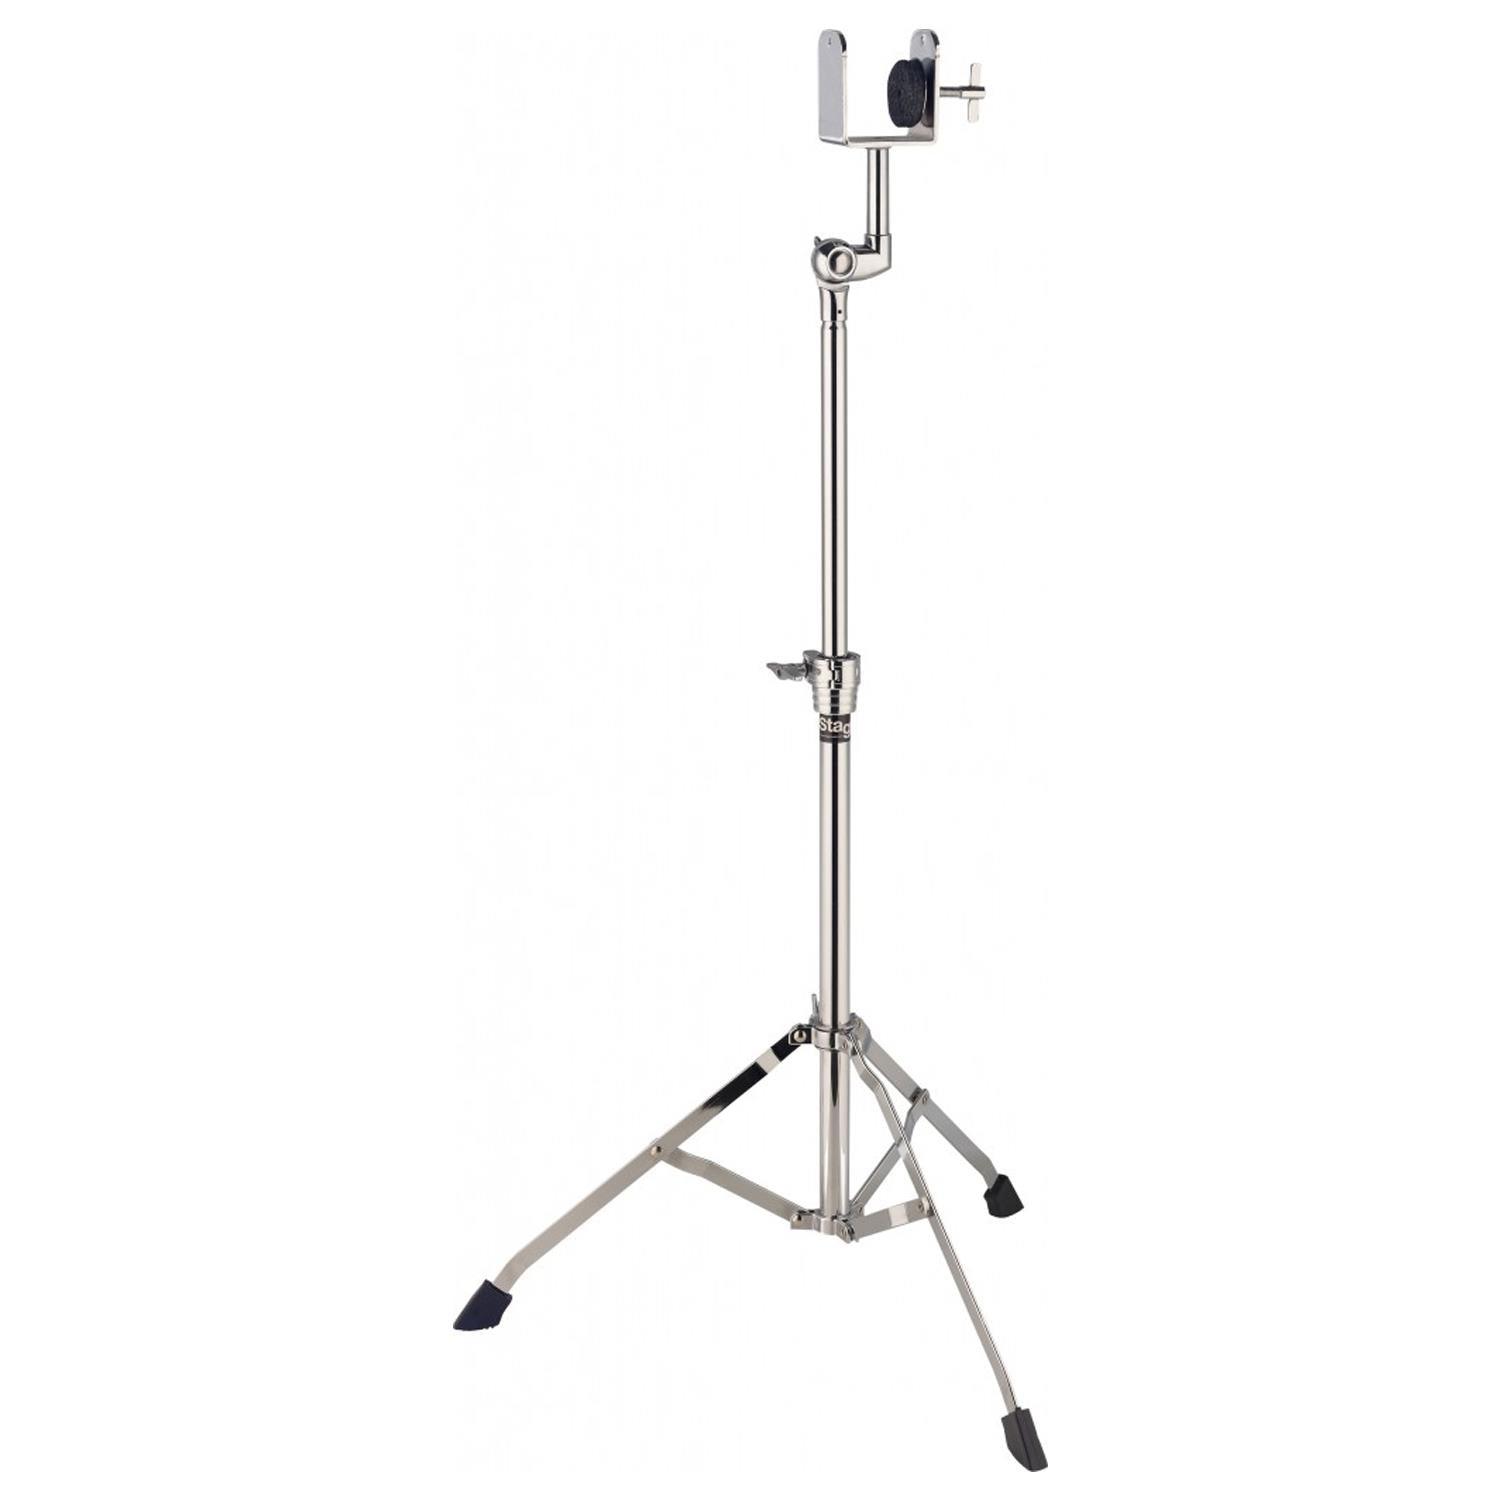 Stagg SG761 Universal Bongo Stand - DY Pro Audio